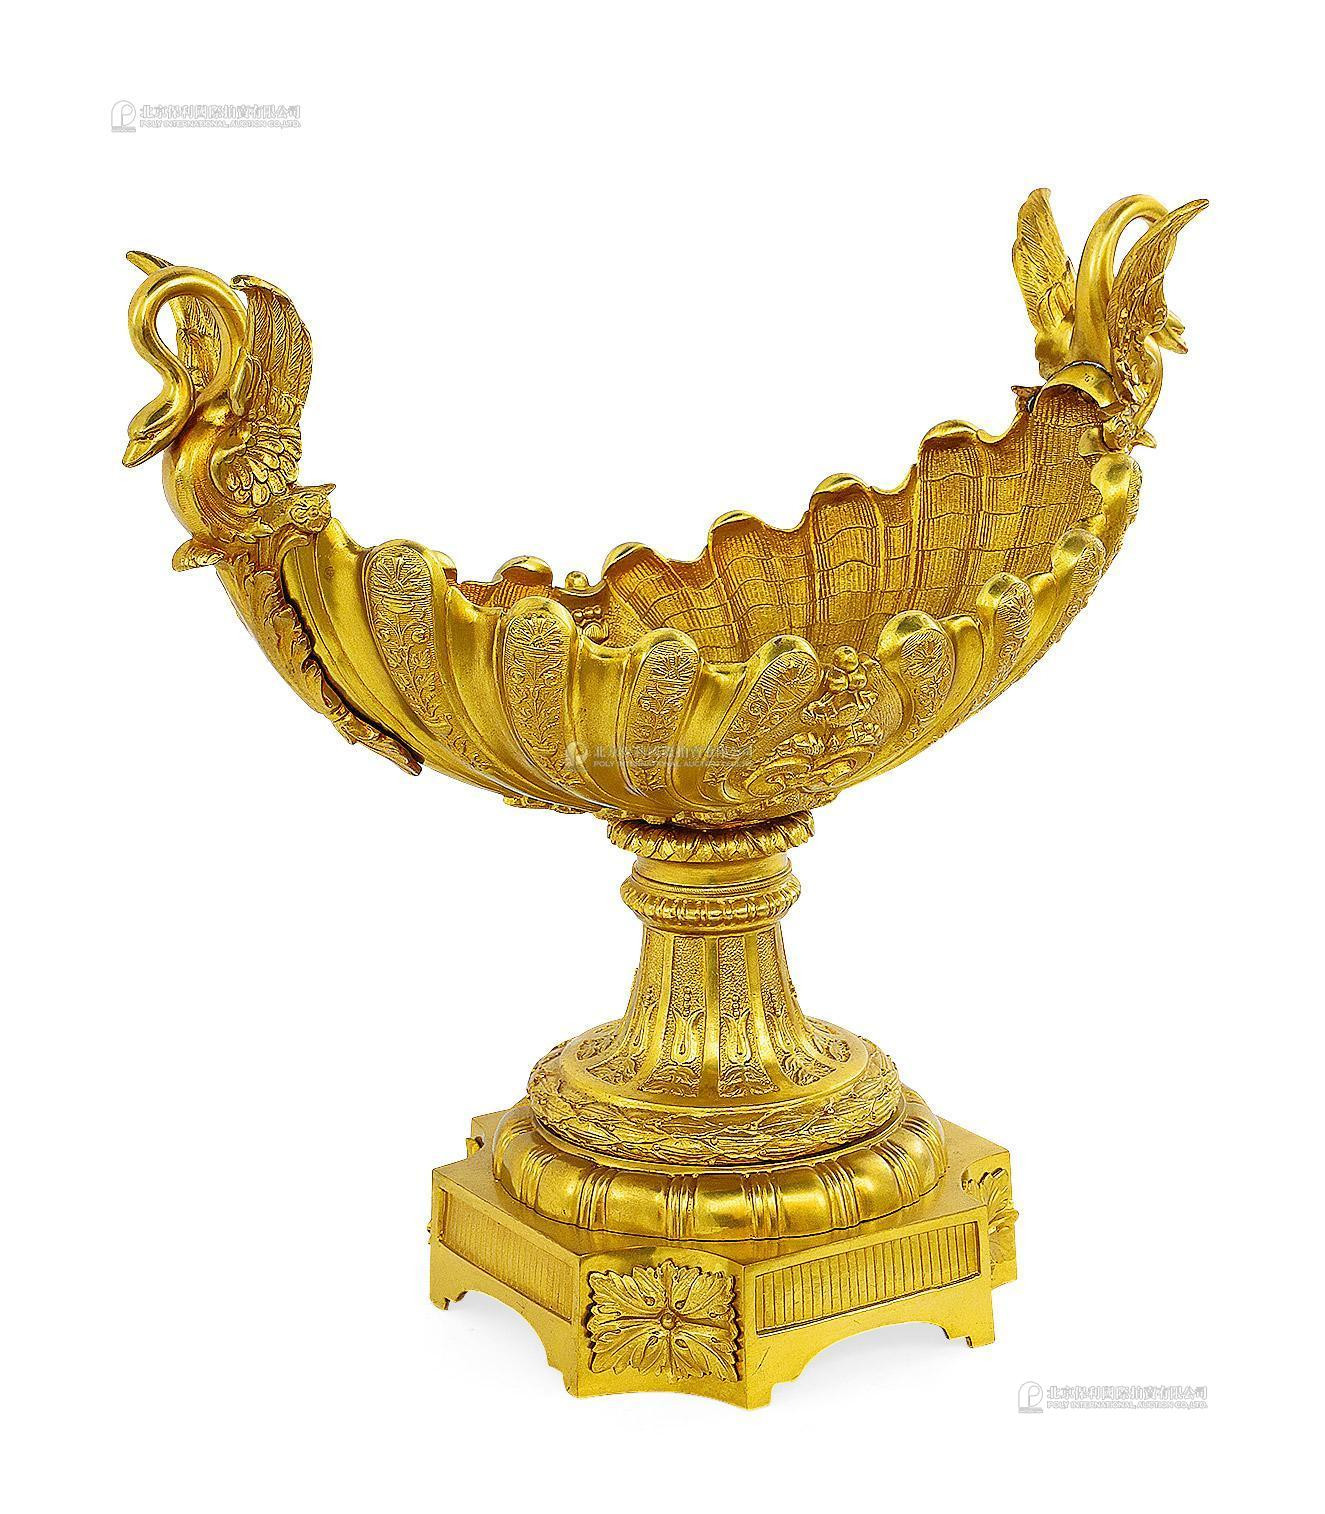 A FRENCH EMPIRE STYLE GILT BRONZE DECORATIVE URN